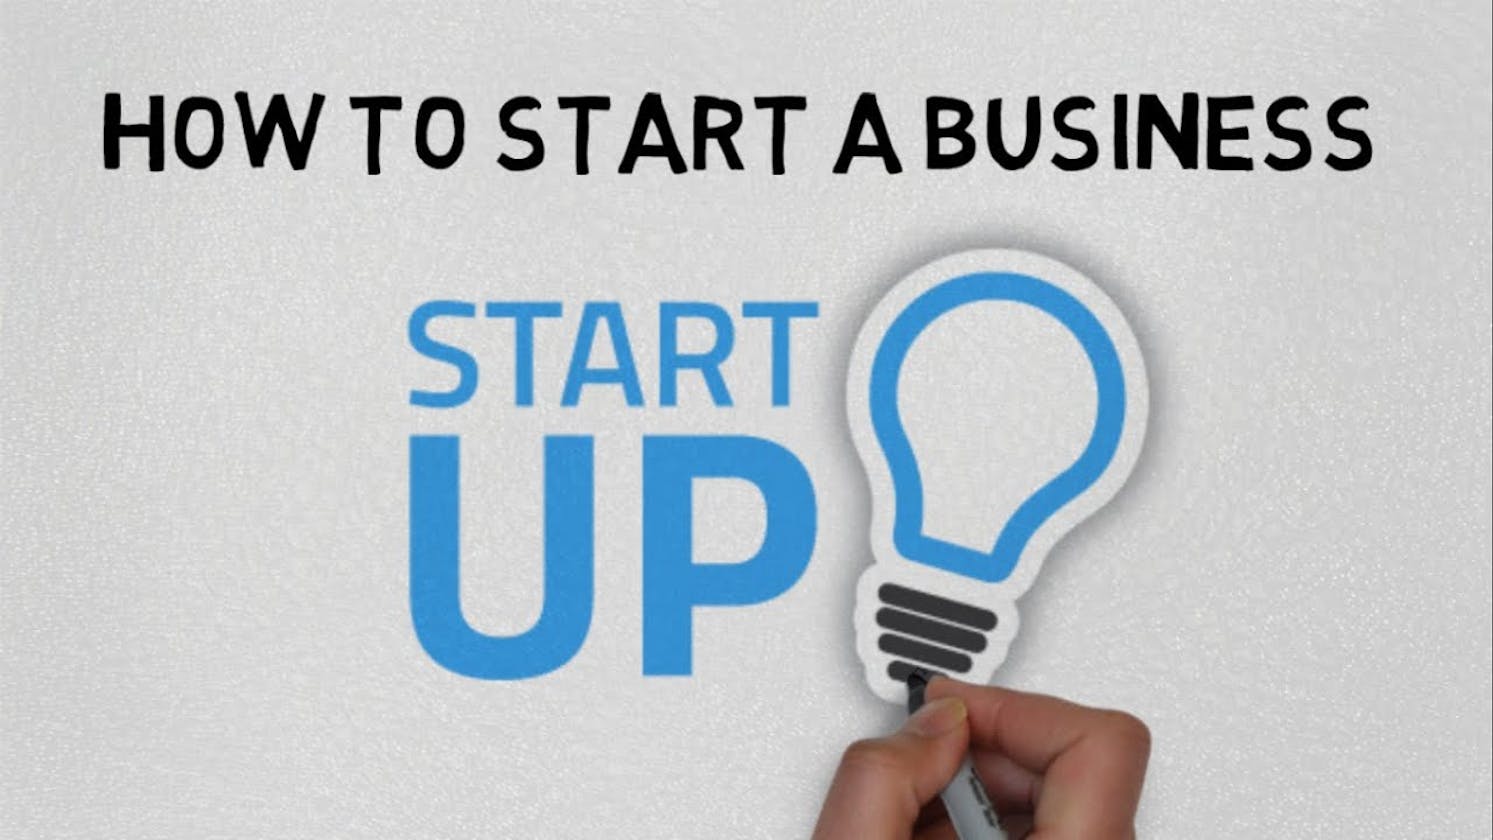 How To Start A Startup/business - Zero To One Animated Book Summary